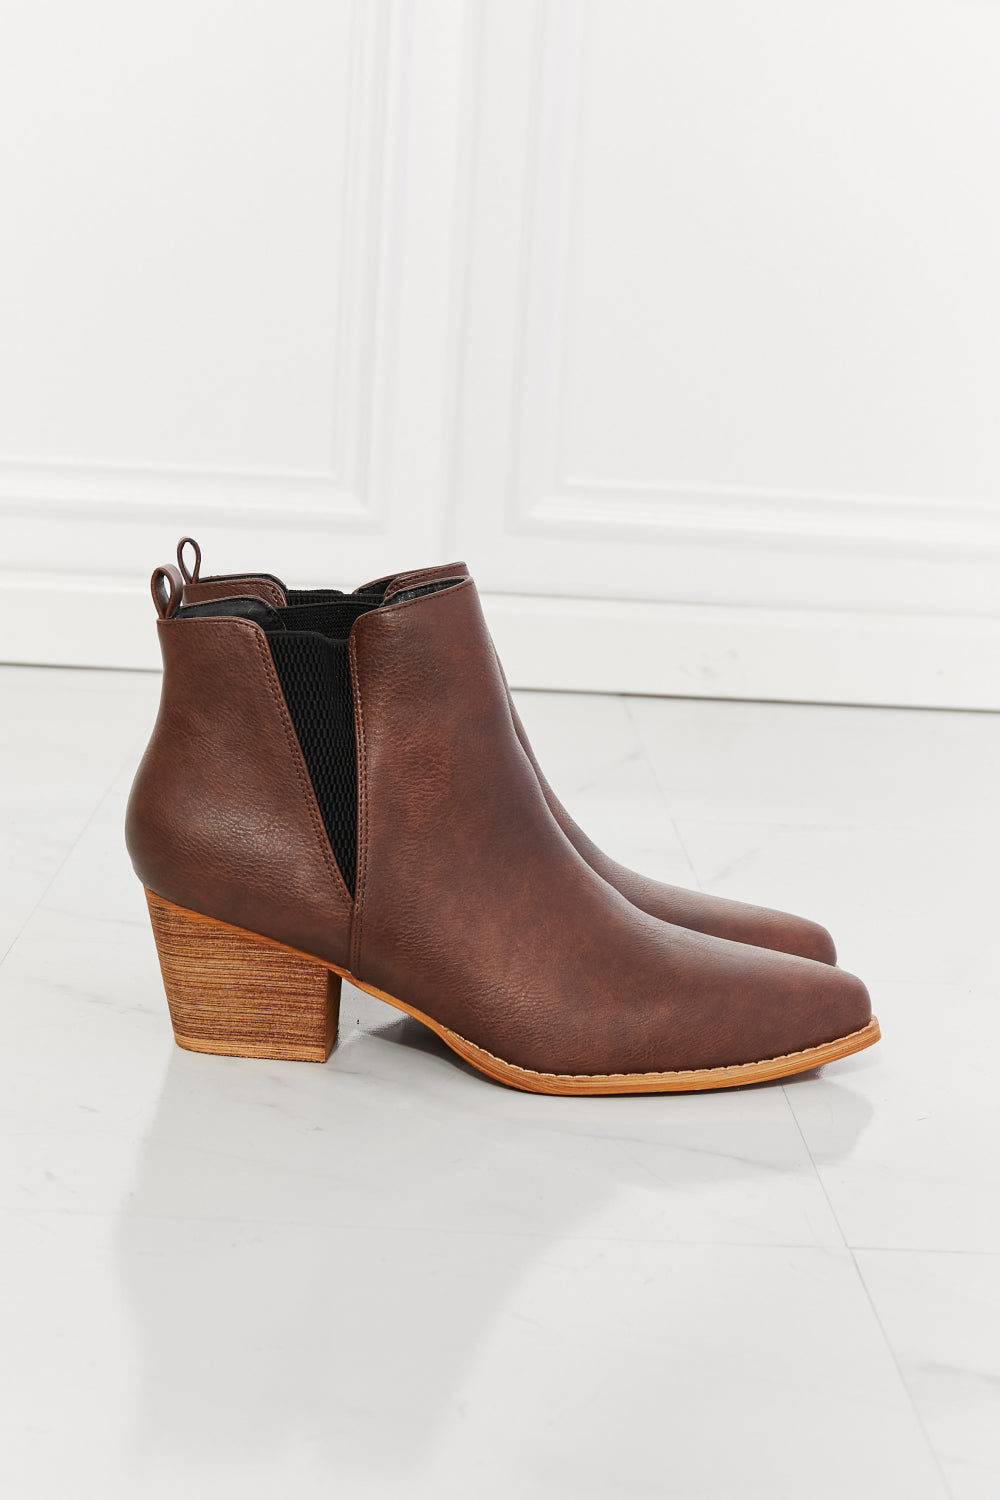 Beige MMShoes Back At It Point Toe Bootie in Chocolate